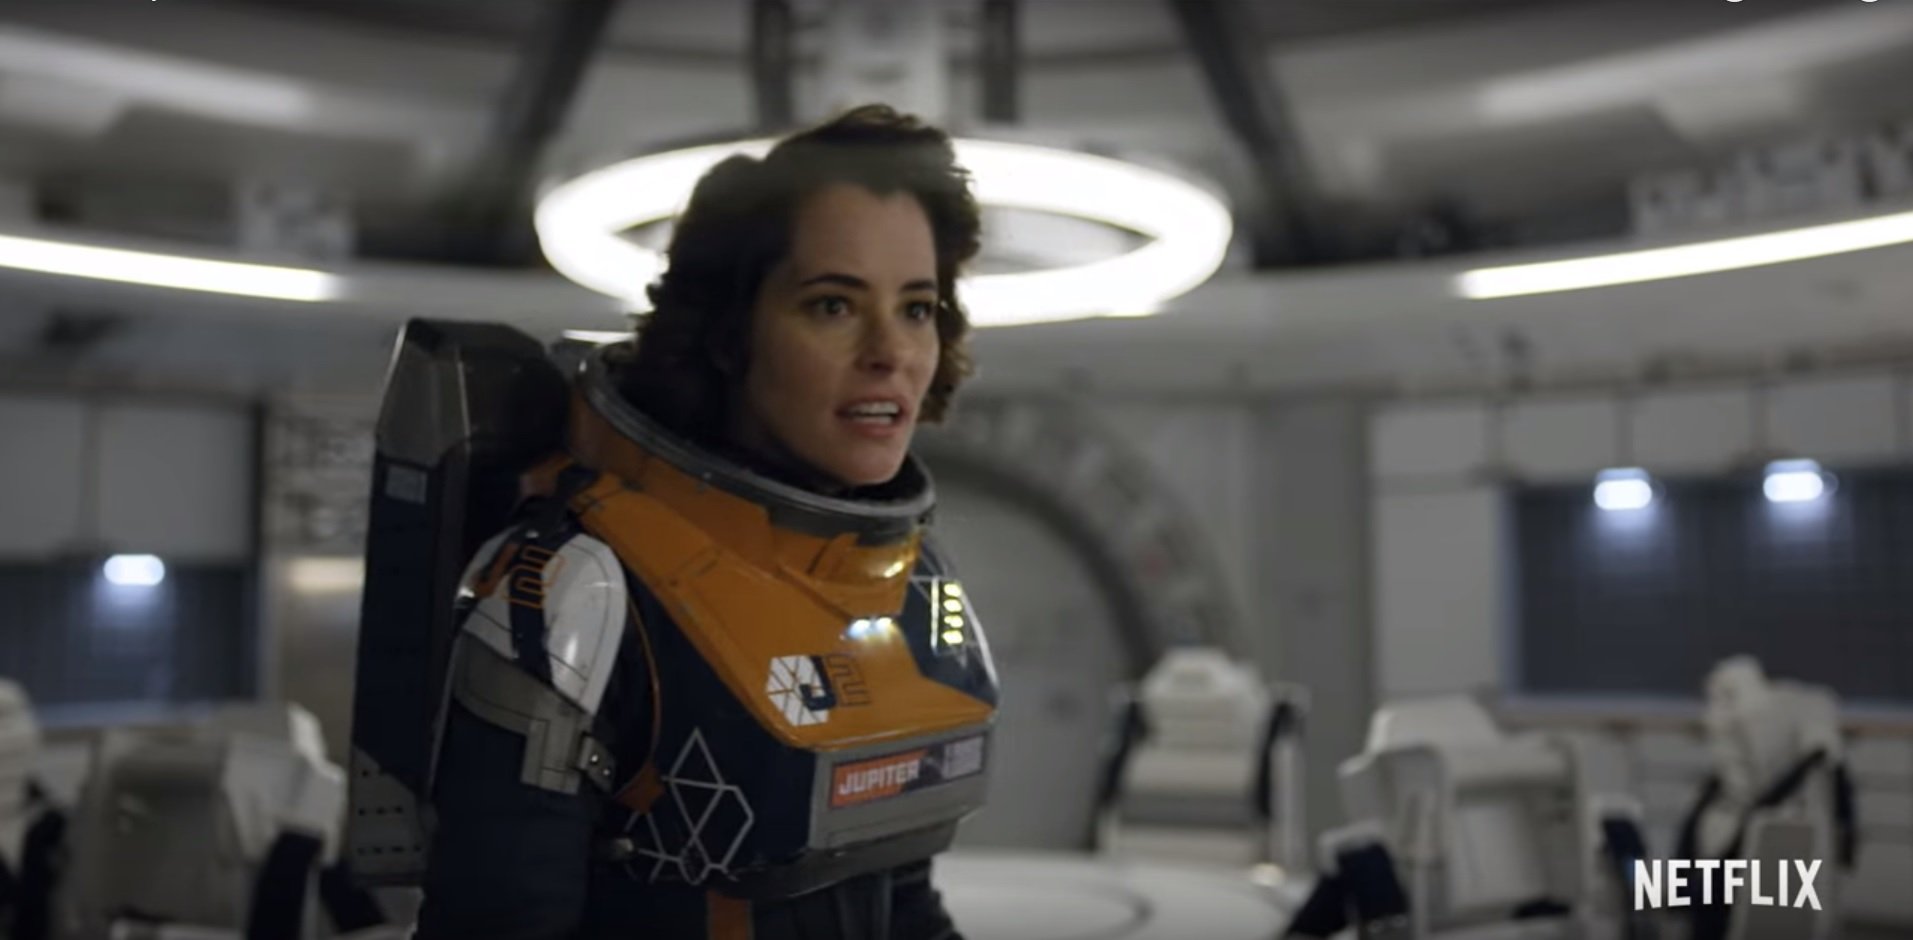 Parker Posey as Dr. Smith on Netflix's "Lost in Space"